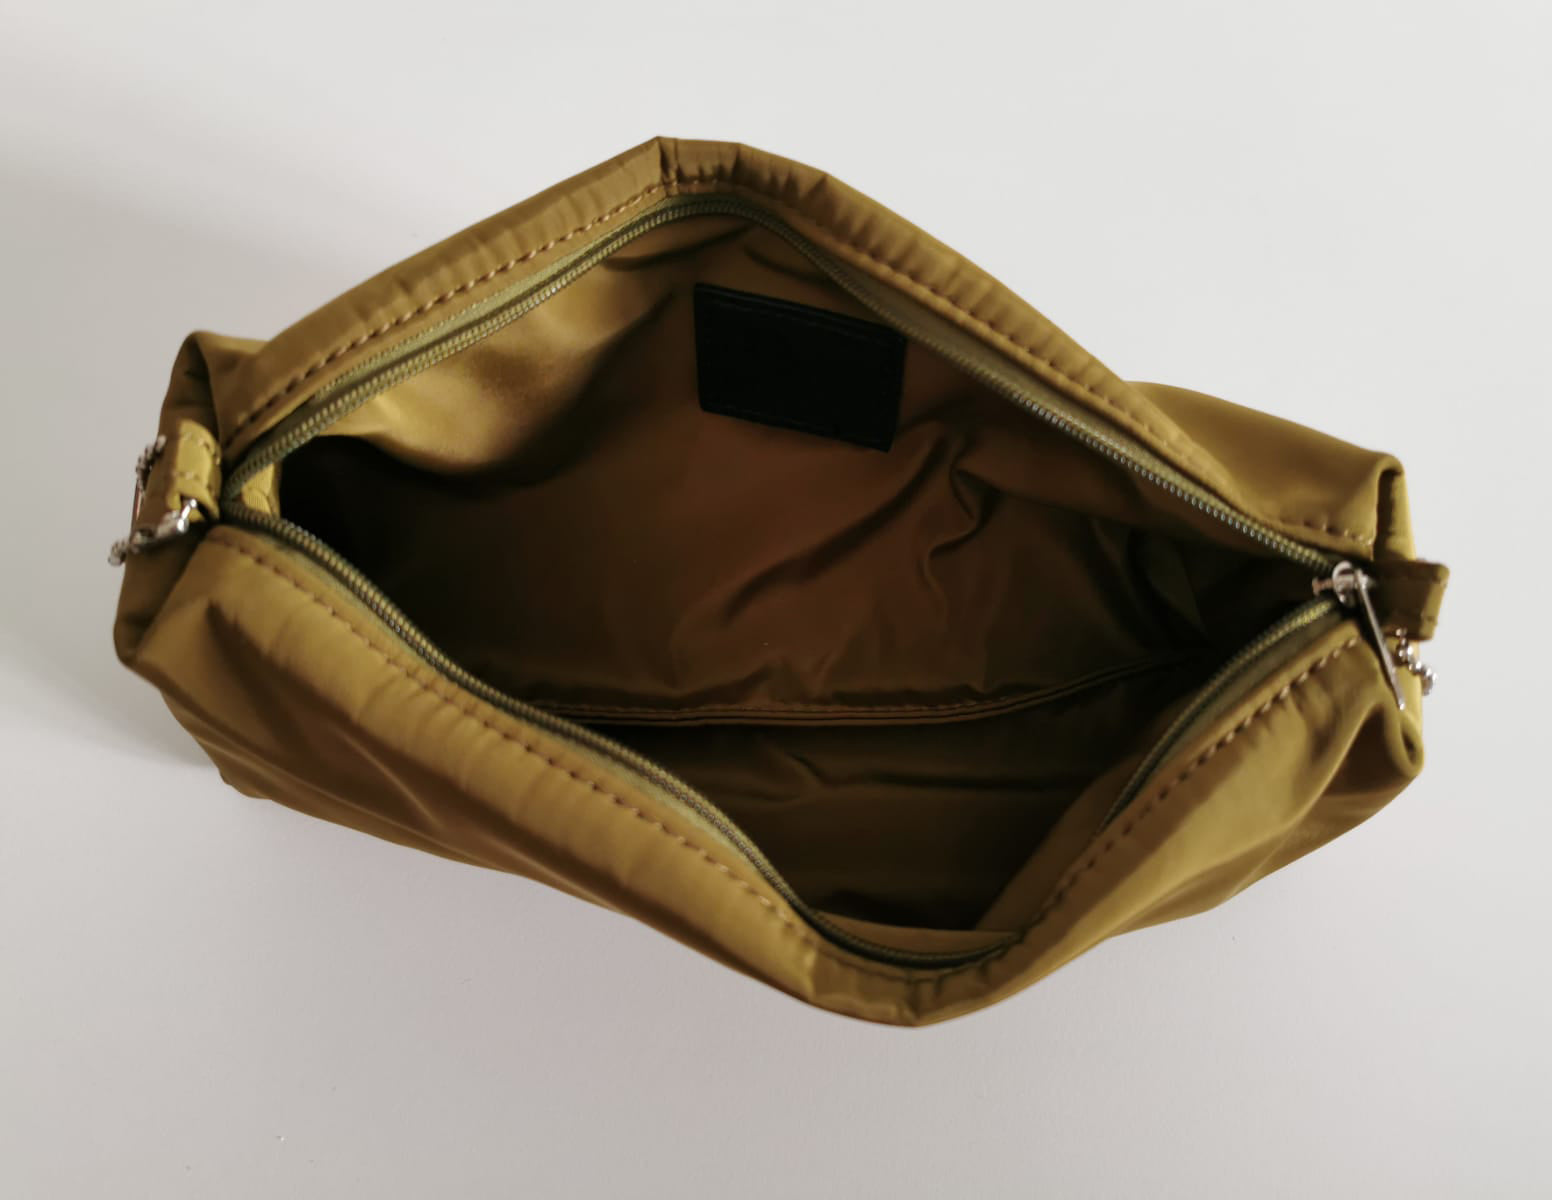 Weave leather bag with olive green pouch